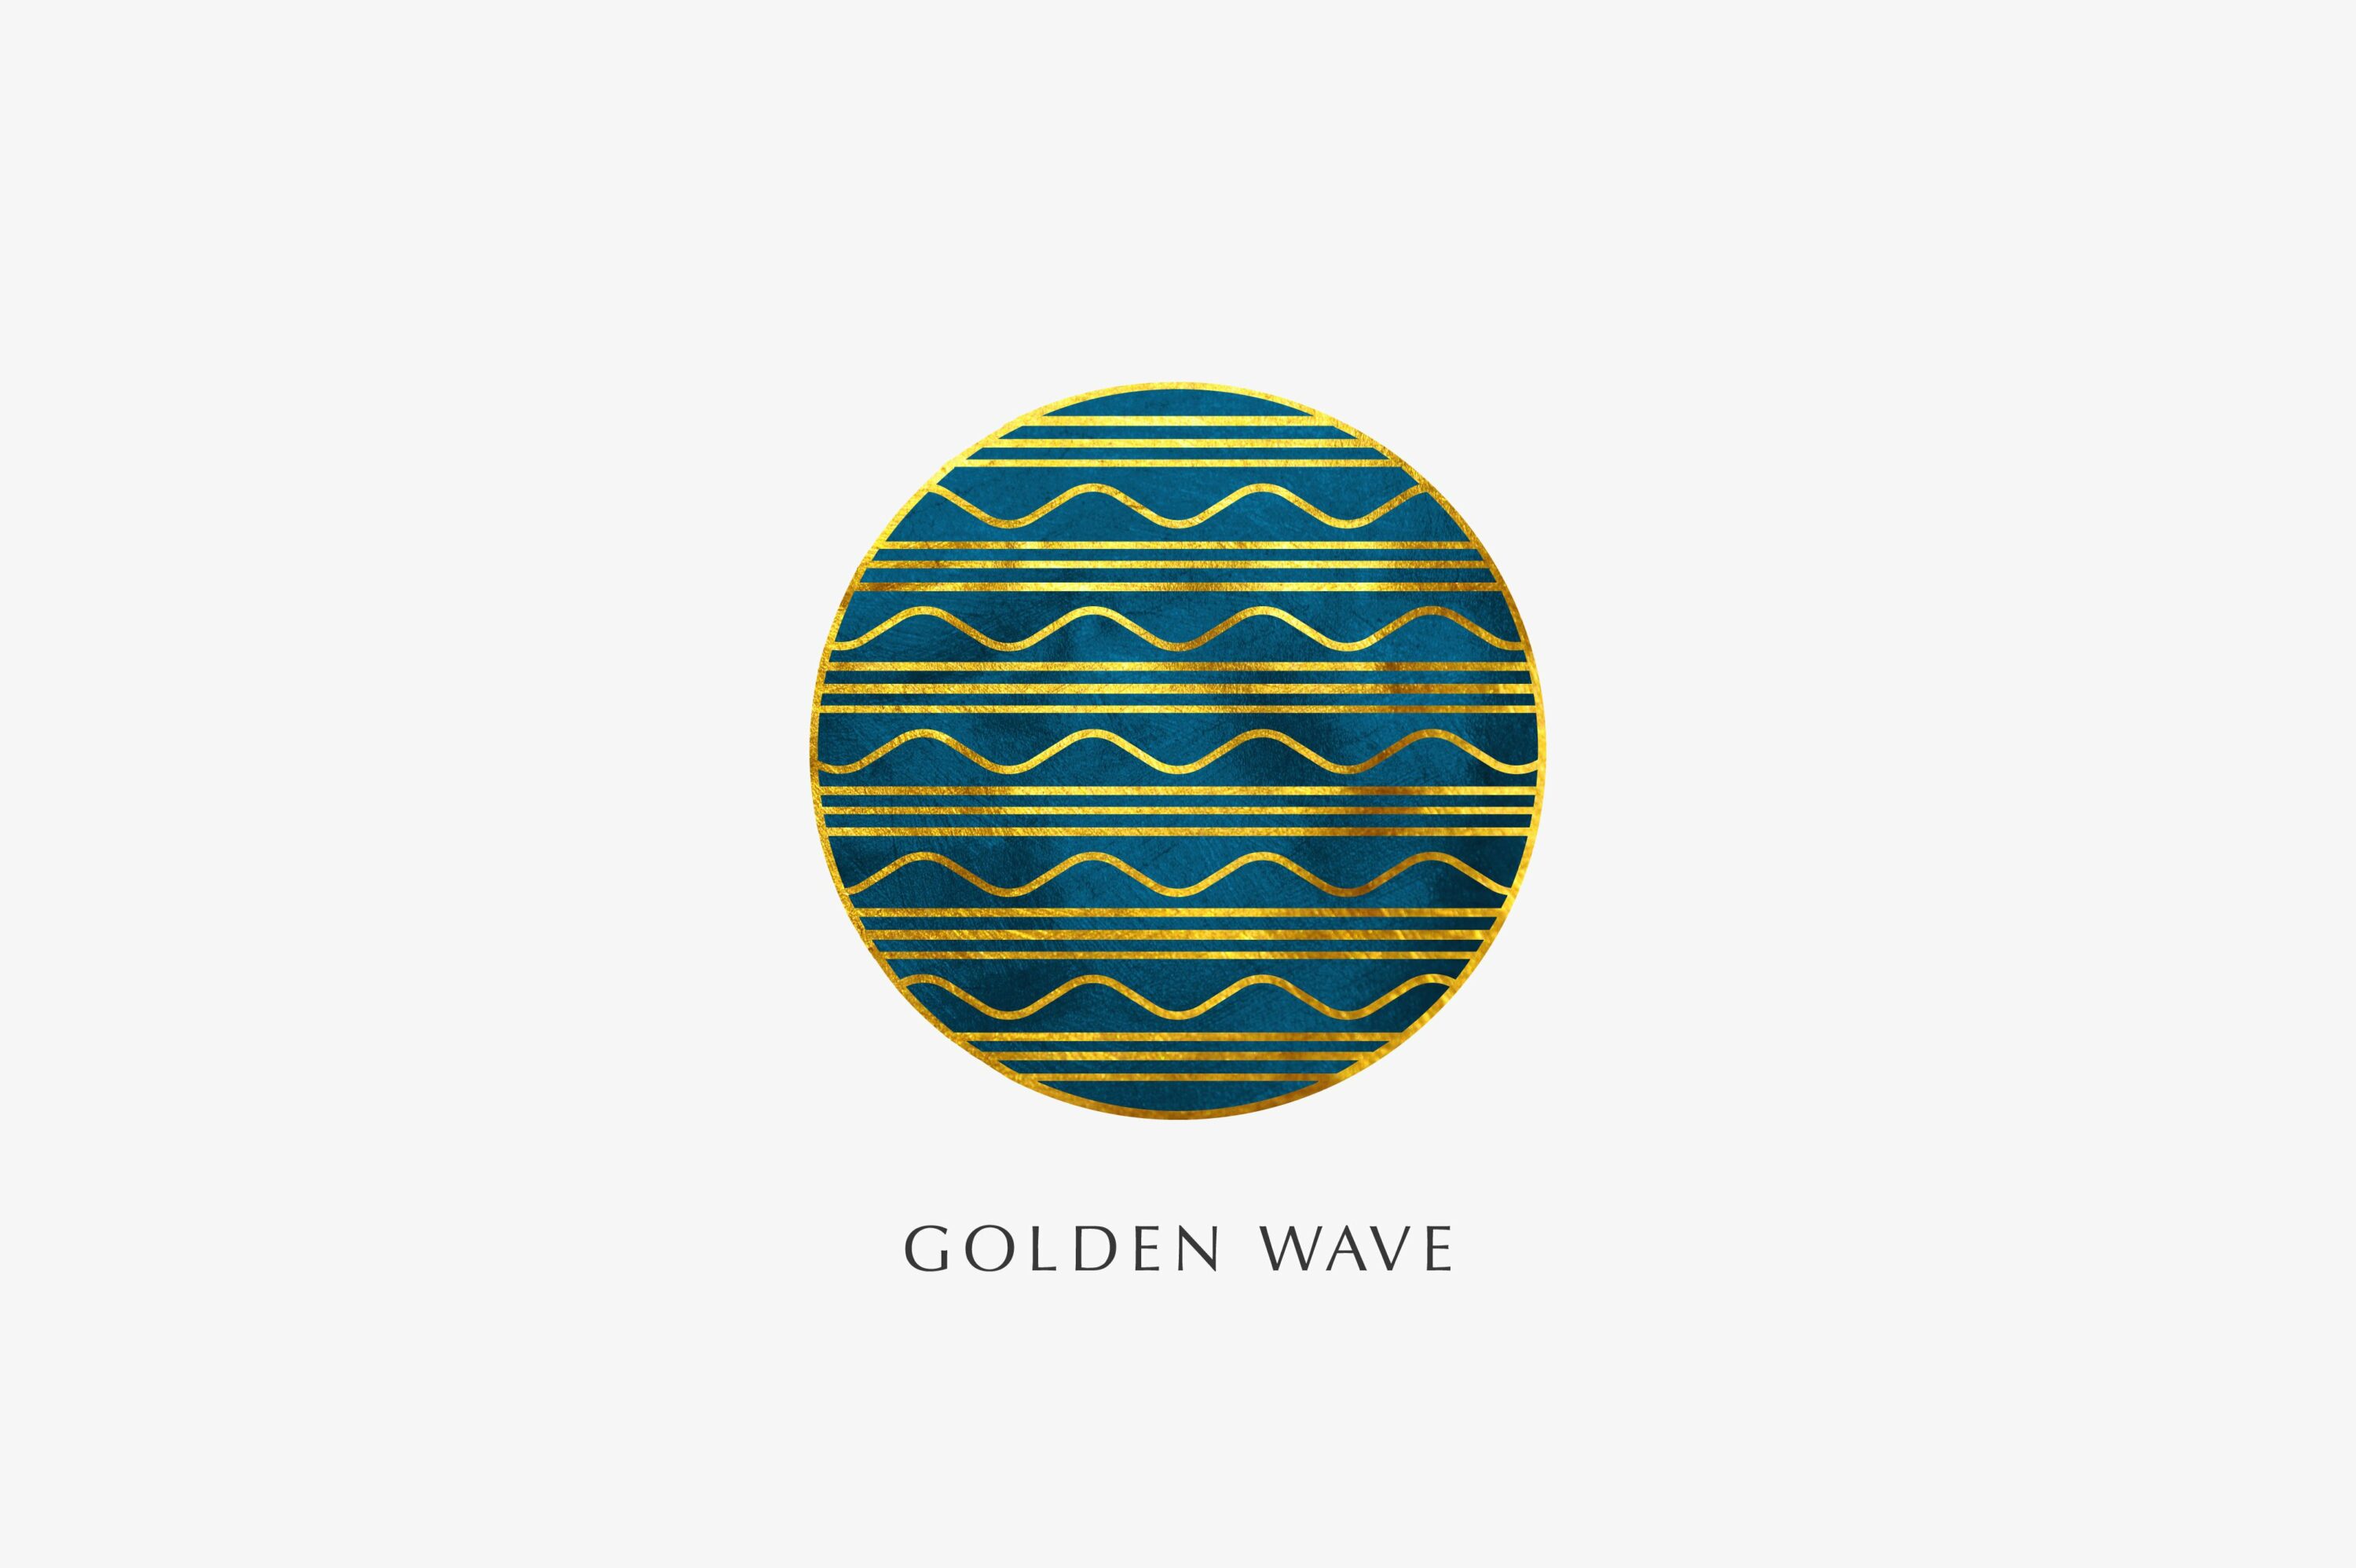 Green wave logo in a round shape.